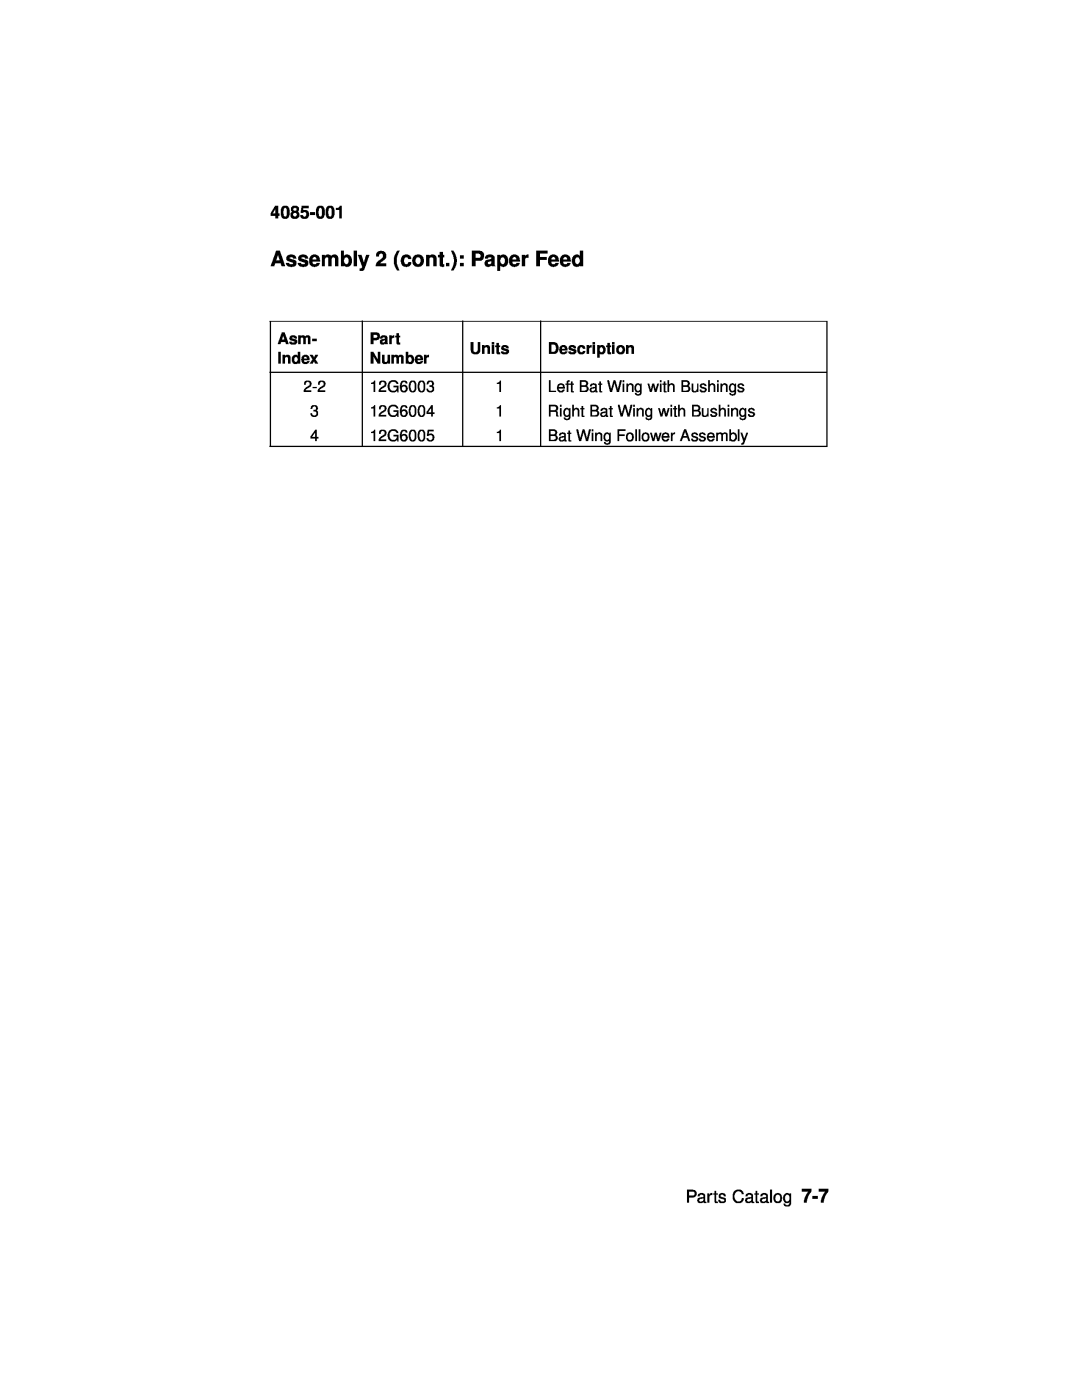 Lexmark Printer, J110 manual Assembly 2 cont.: Paper Feed, 4085-001 